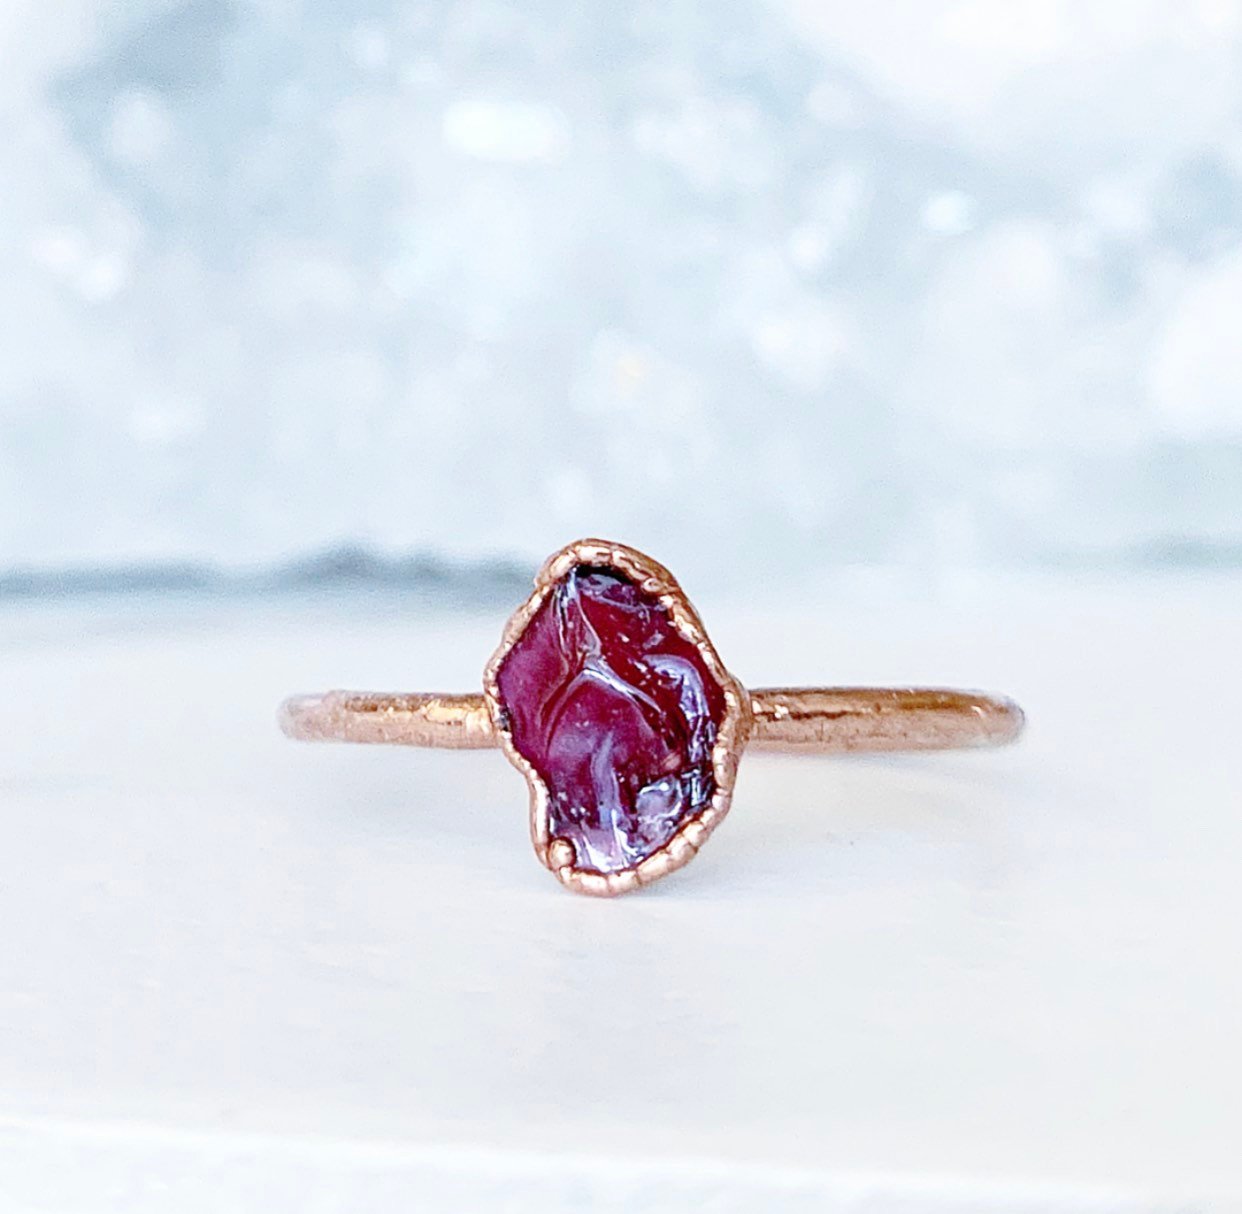 Buy Raw Ruby Two Stone Copper Ring, Adjustable Copper Double Stone Ring,  Birthstone Ring Online in India - Etsy